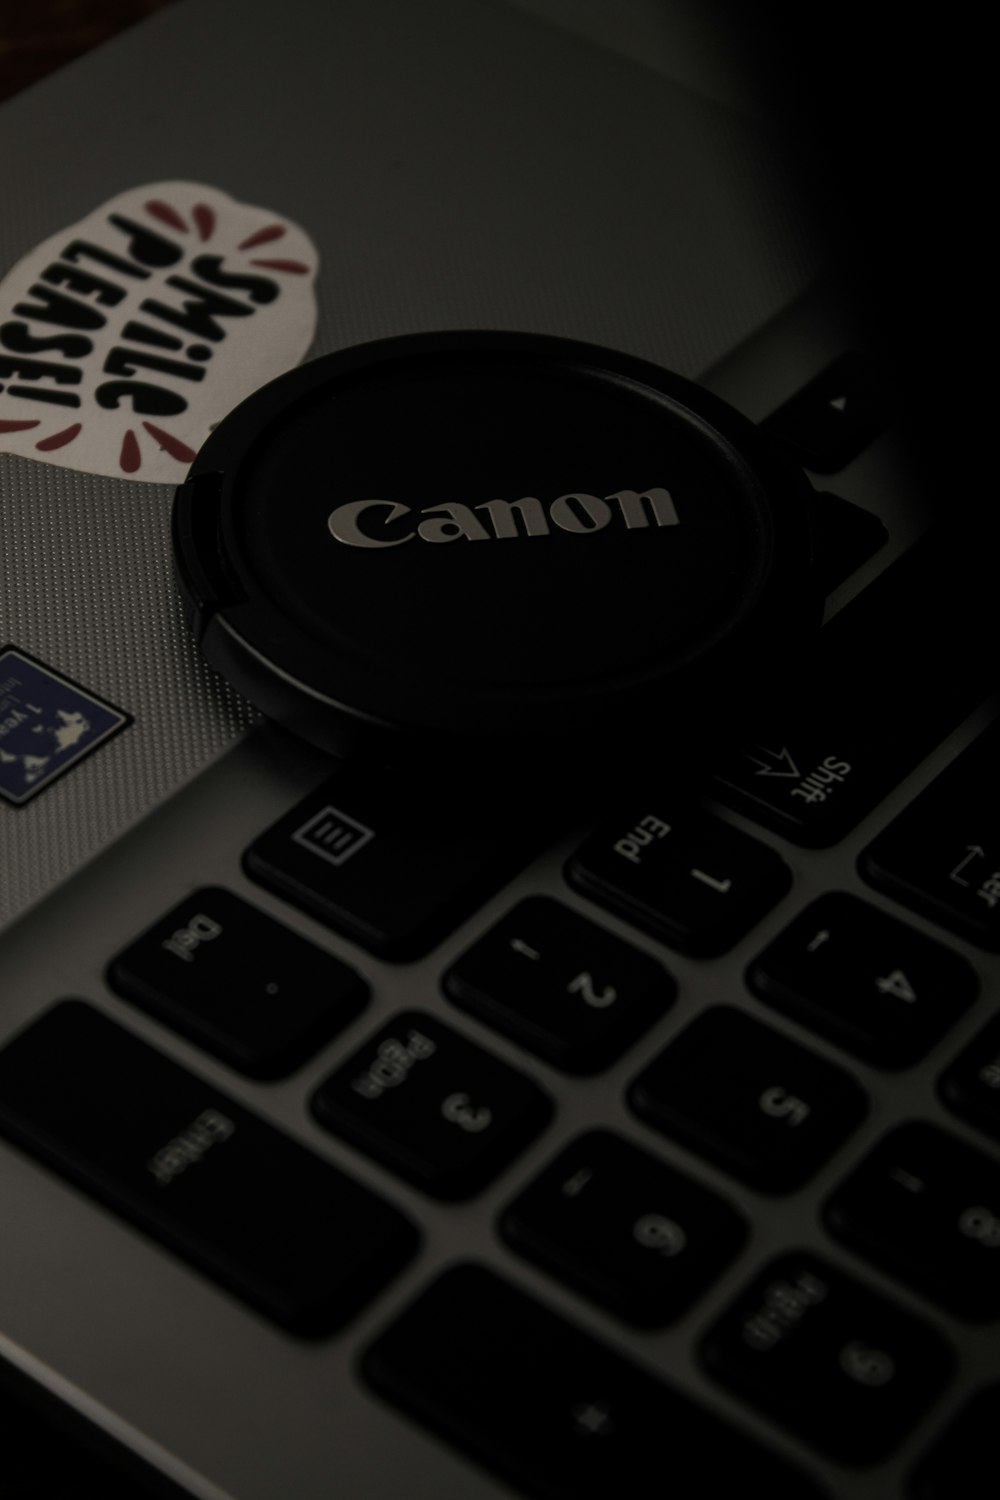 a close up of a laptop keyboard with a canon sticker on it